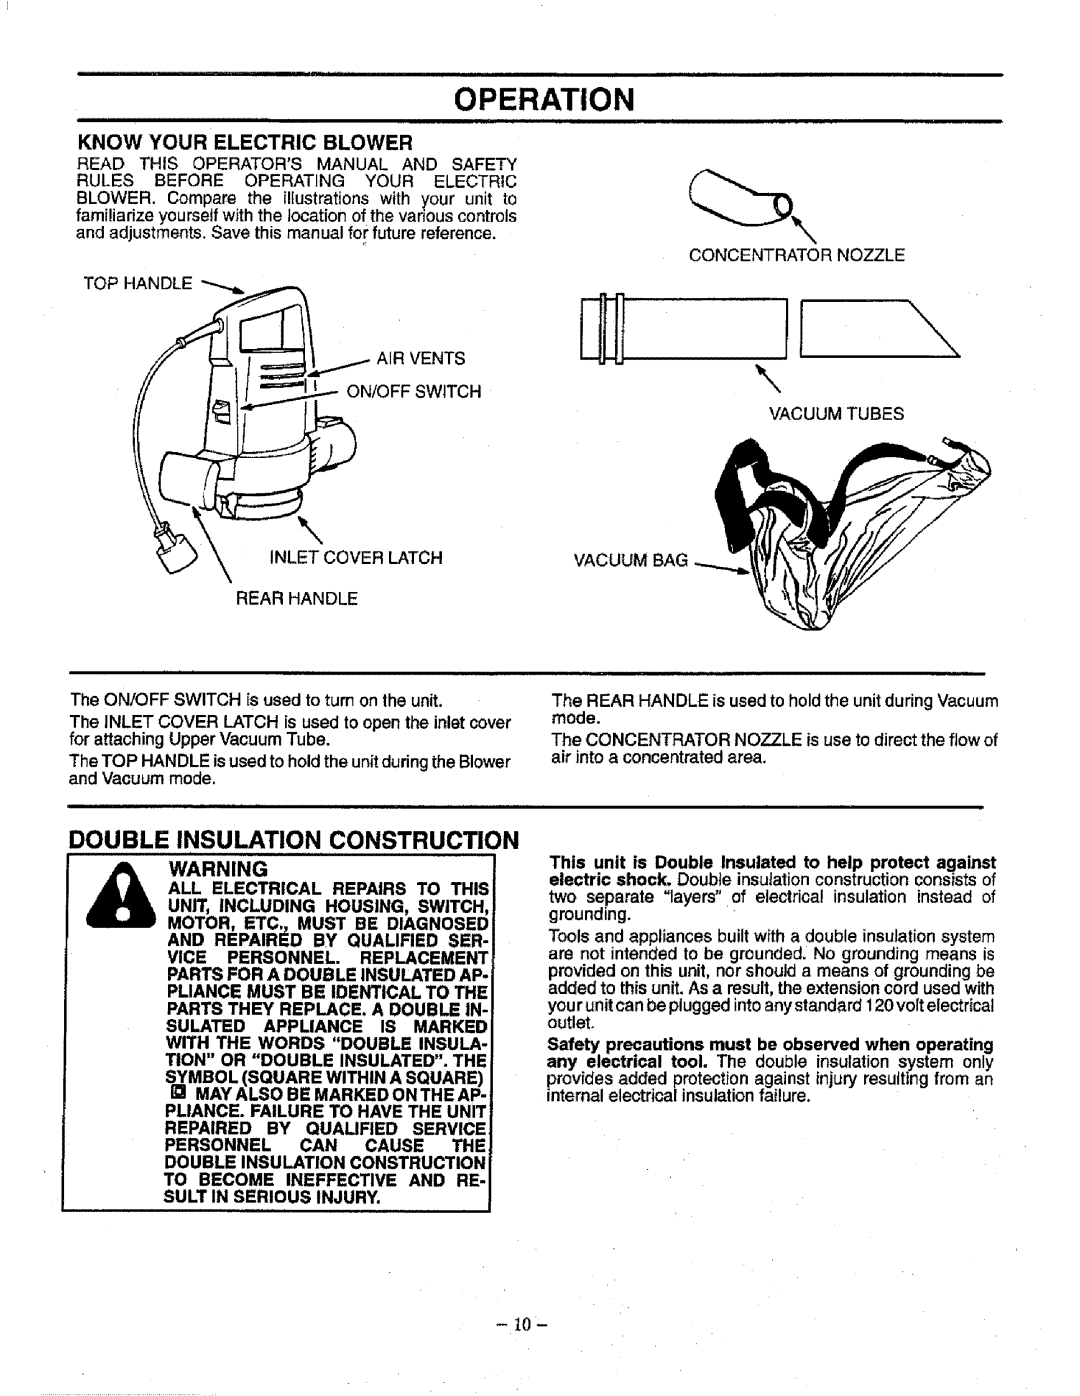 Craftsman 358.798340 manual Double Insulation Construction, Know Your Electric Blower 